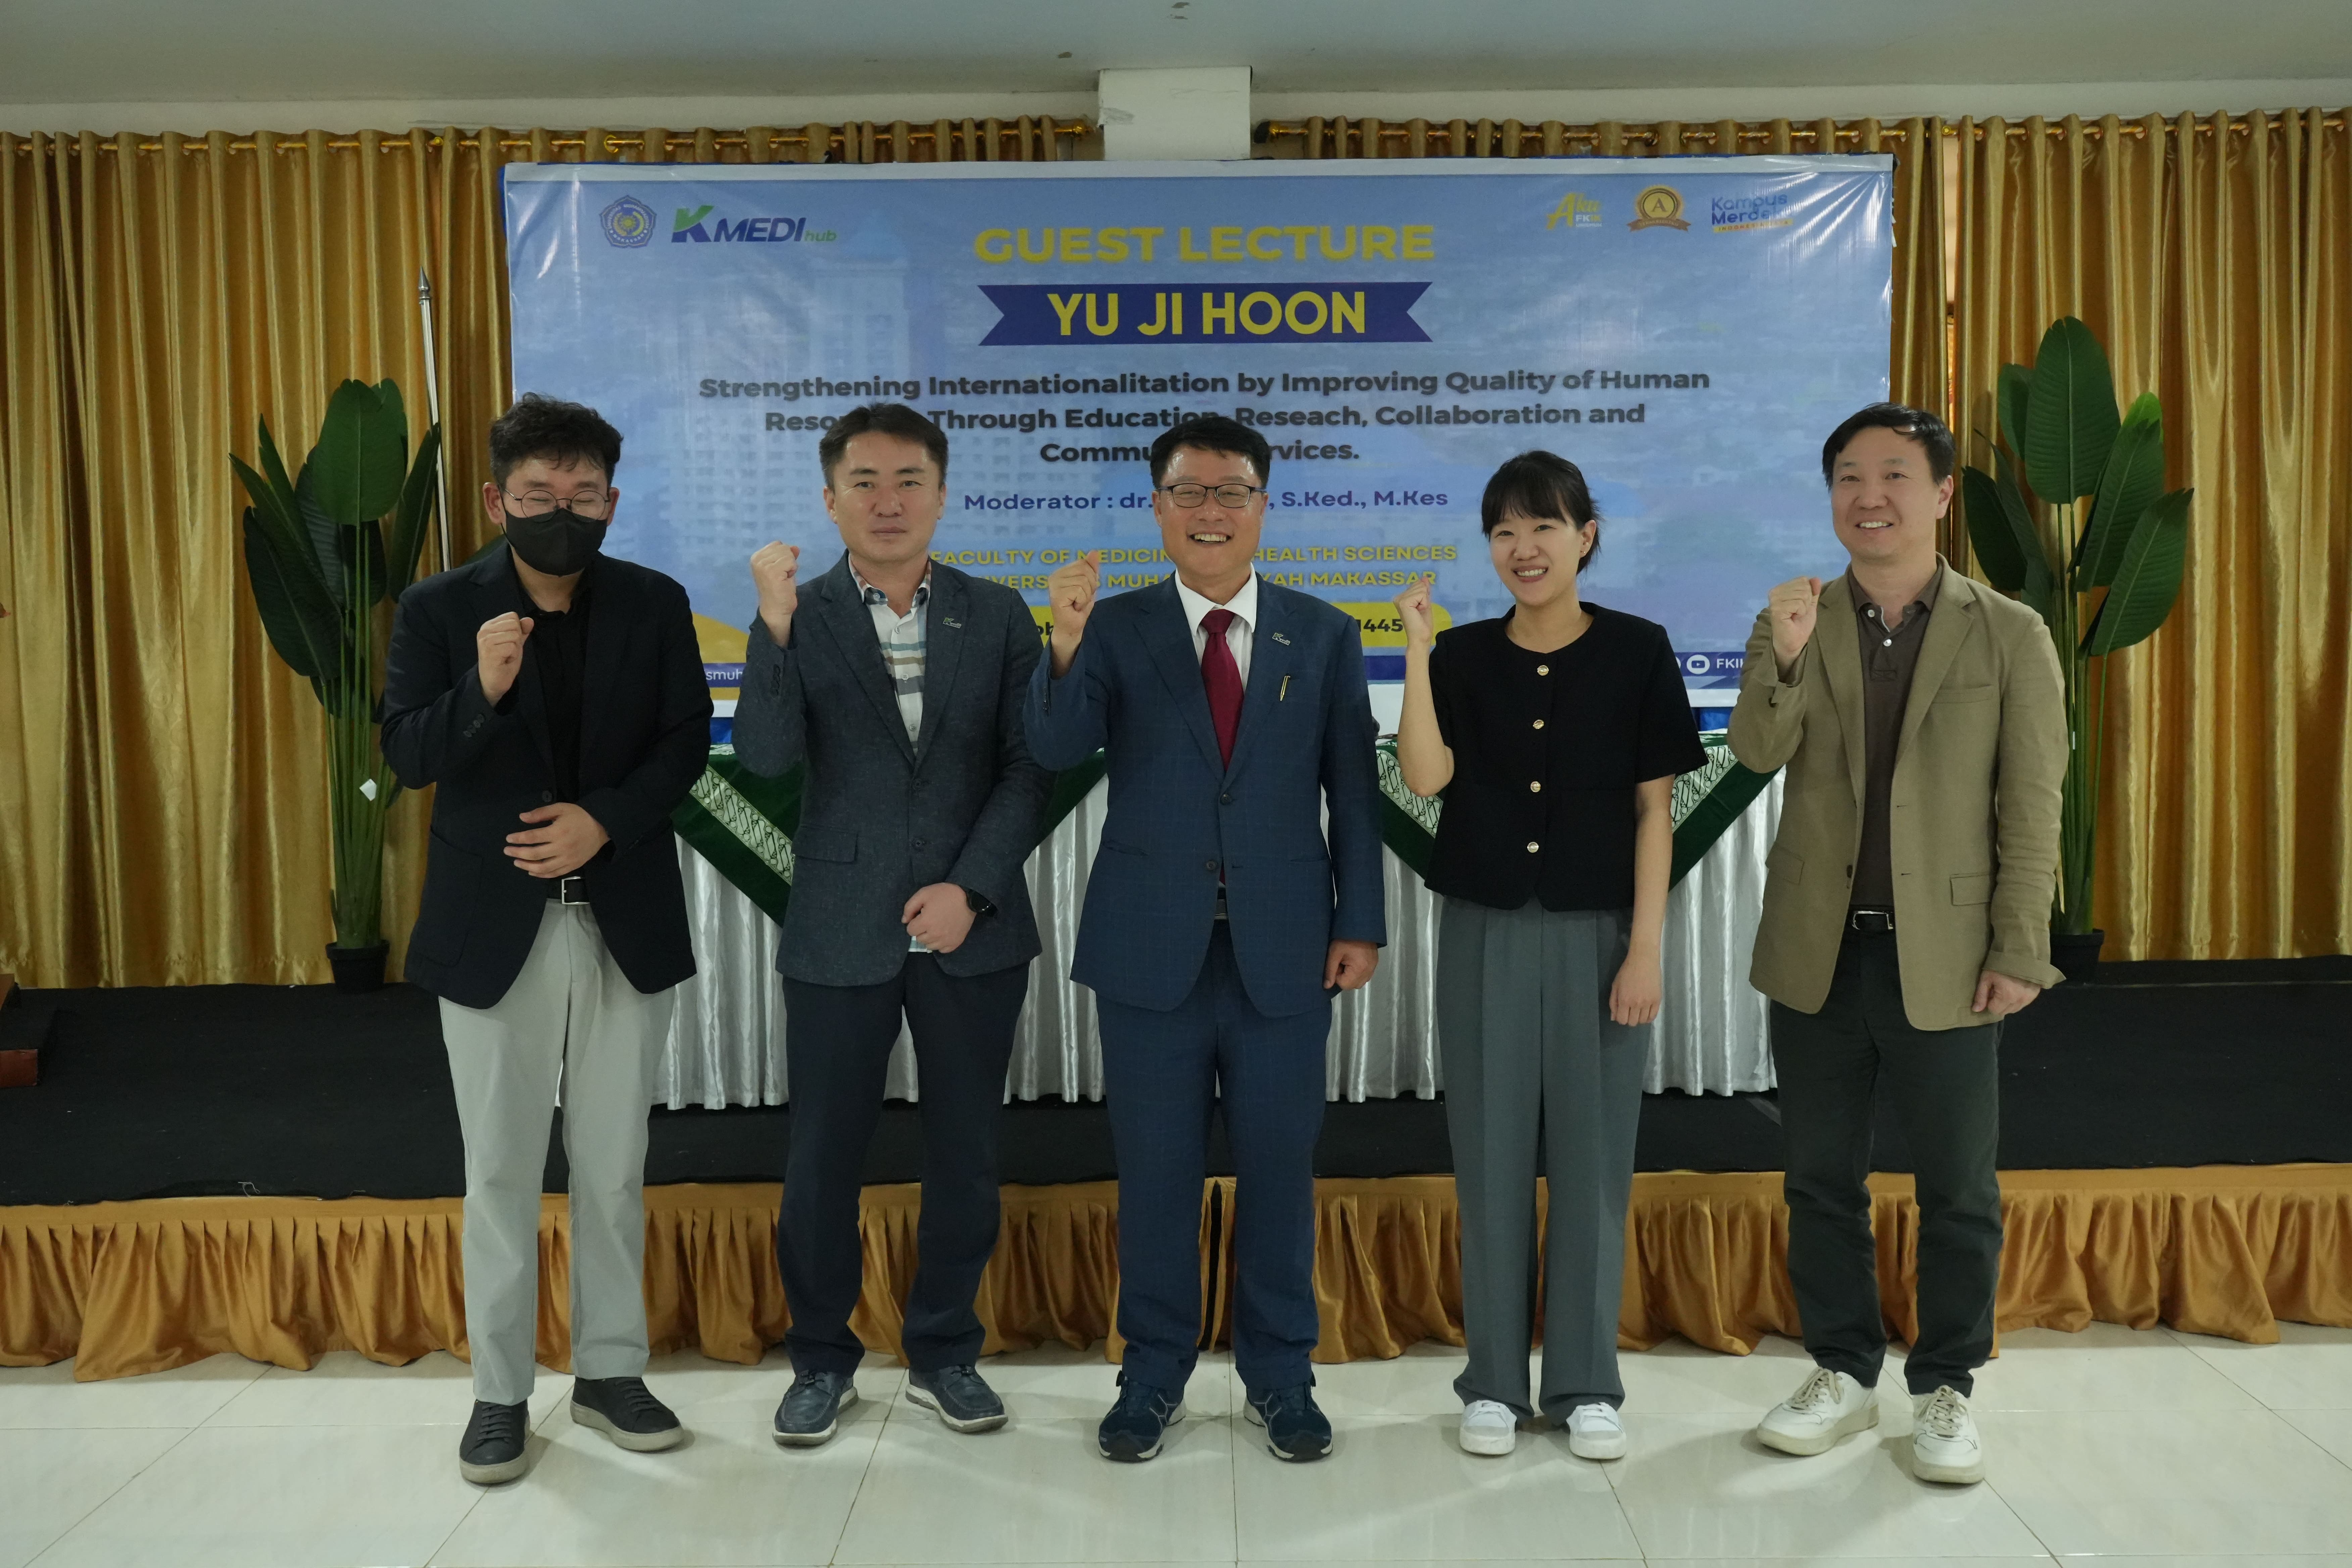 GUEST LECTURE K-MEDIHUB KOREA : Strengthening Internationalization through Enhancing the Quality of Human Resources via Education, Research, Collaboration, and Community Services